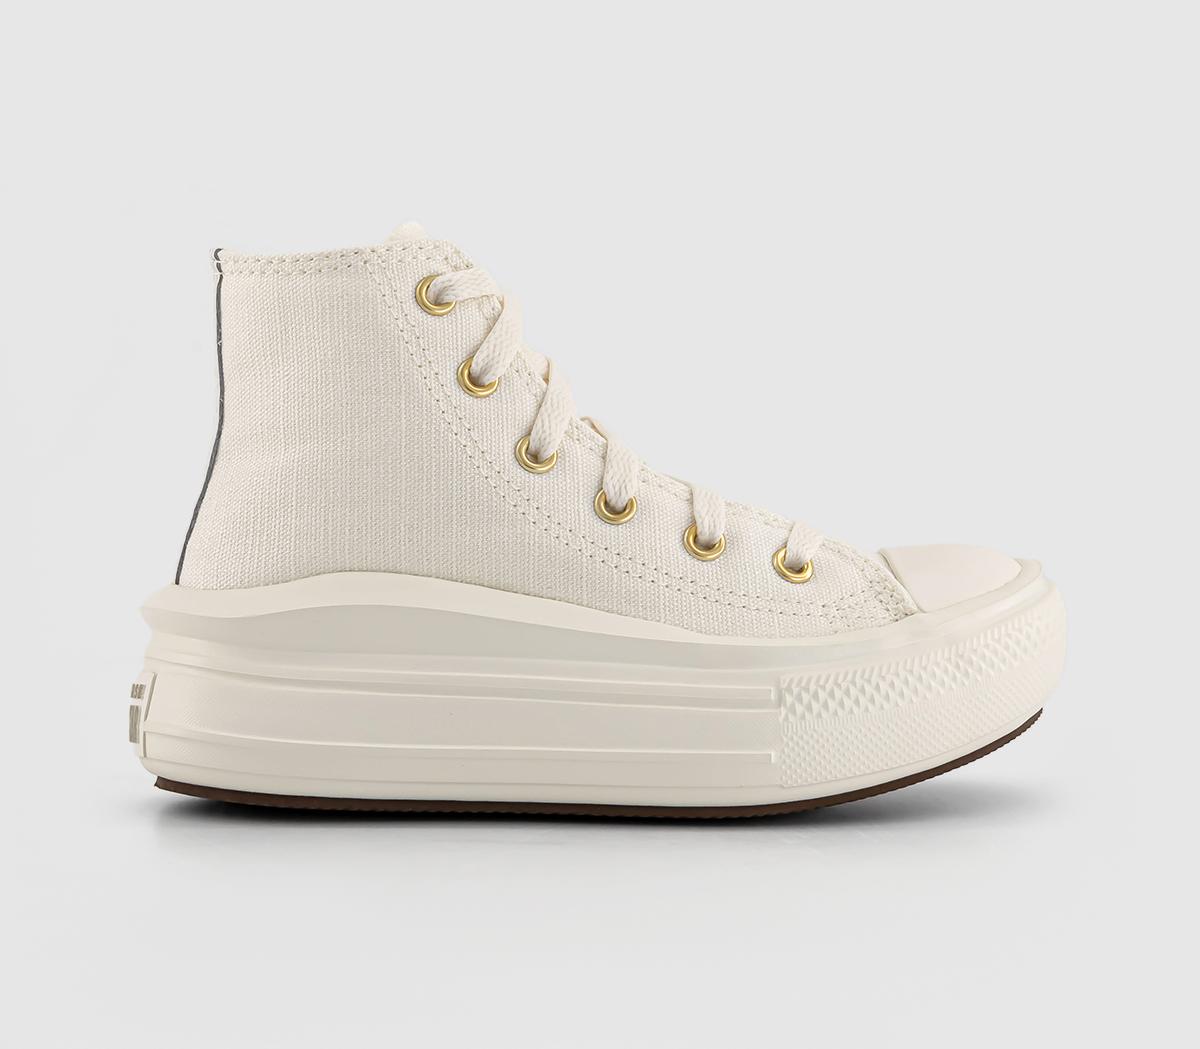 ConverseAll Star Move Youth TrainersEgret Metallic Light Gold Egret